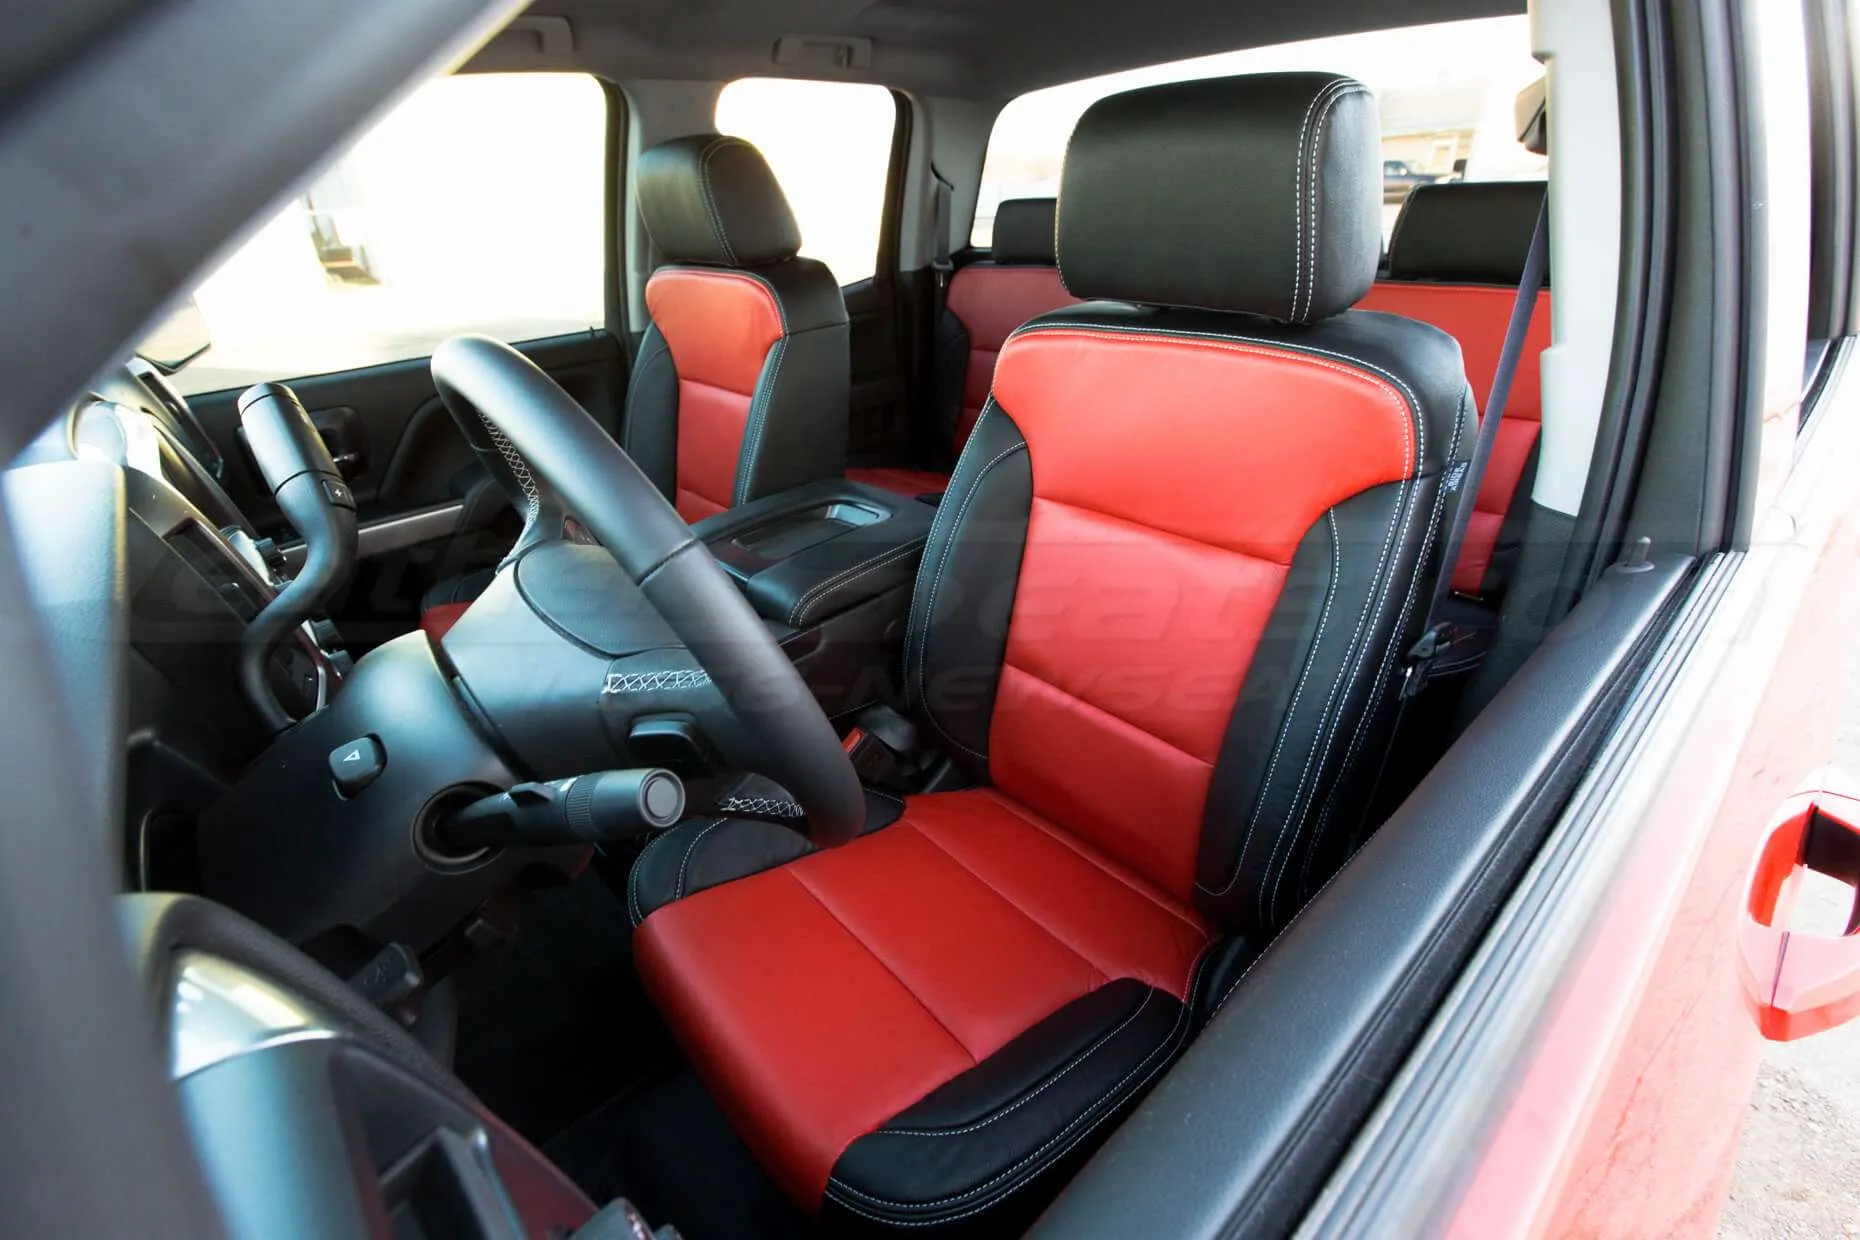 GMC Sierra leather upholstery kit - Black and Bright Red